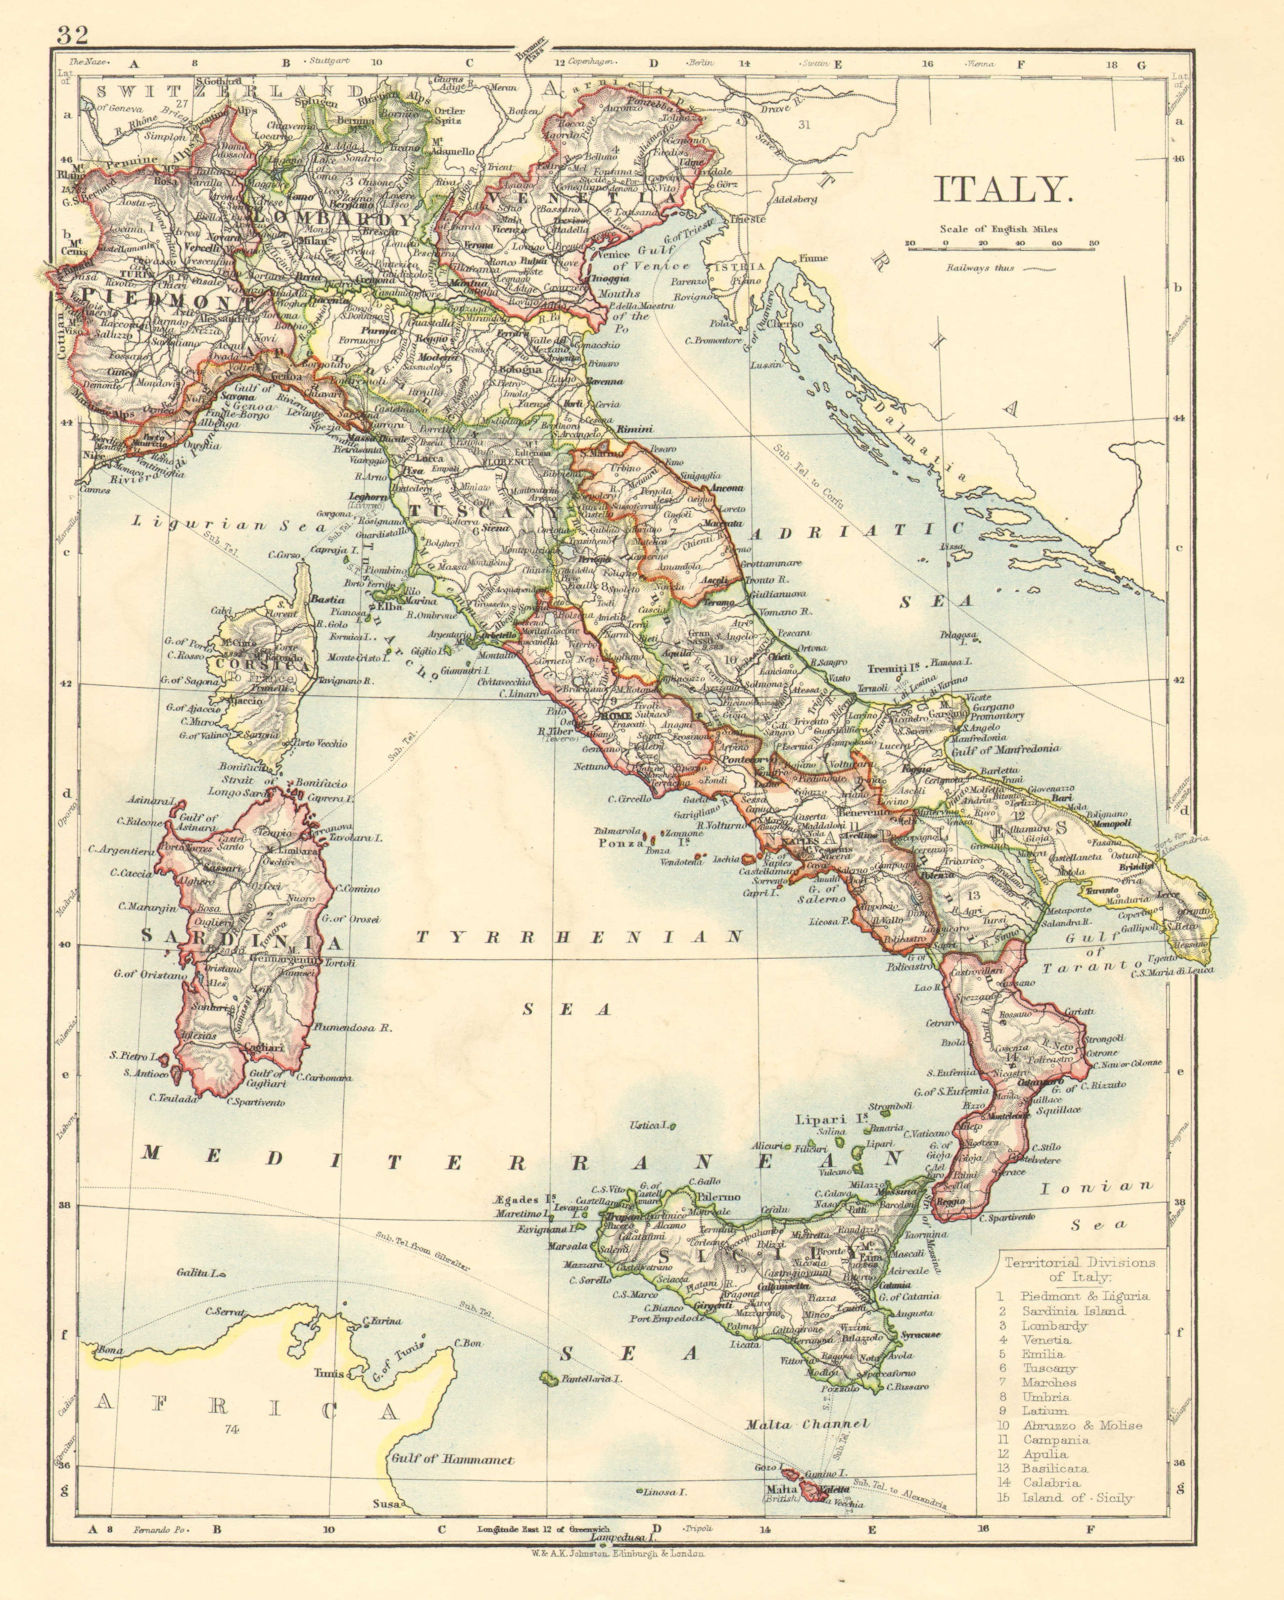 Associate Product ITALY. Showing states/territorial divisions. JOHNSTON 1899 old antique map